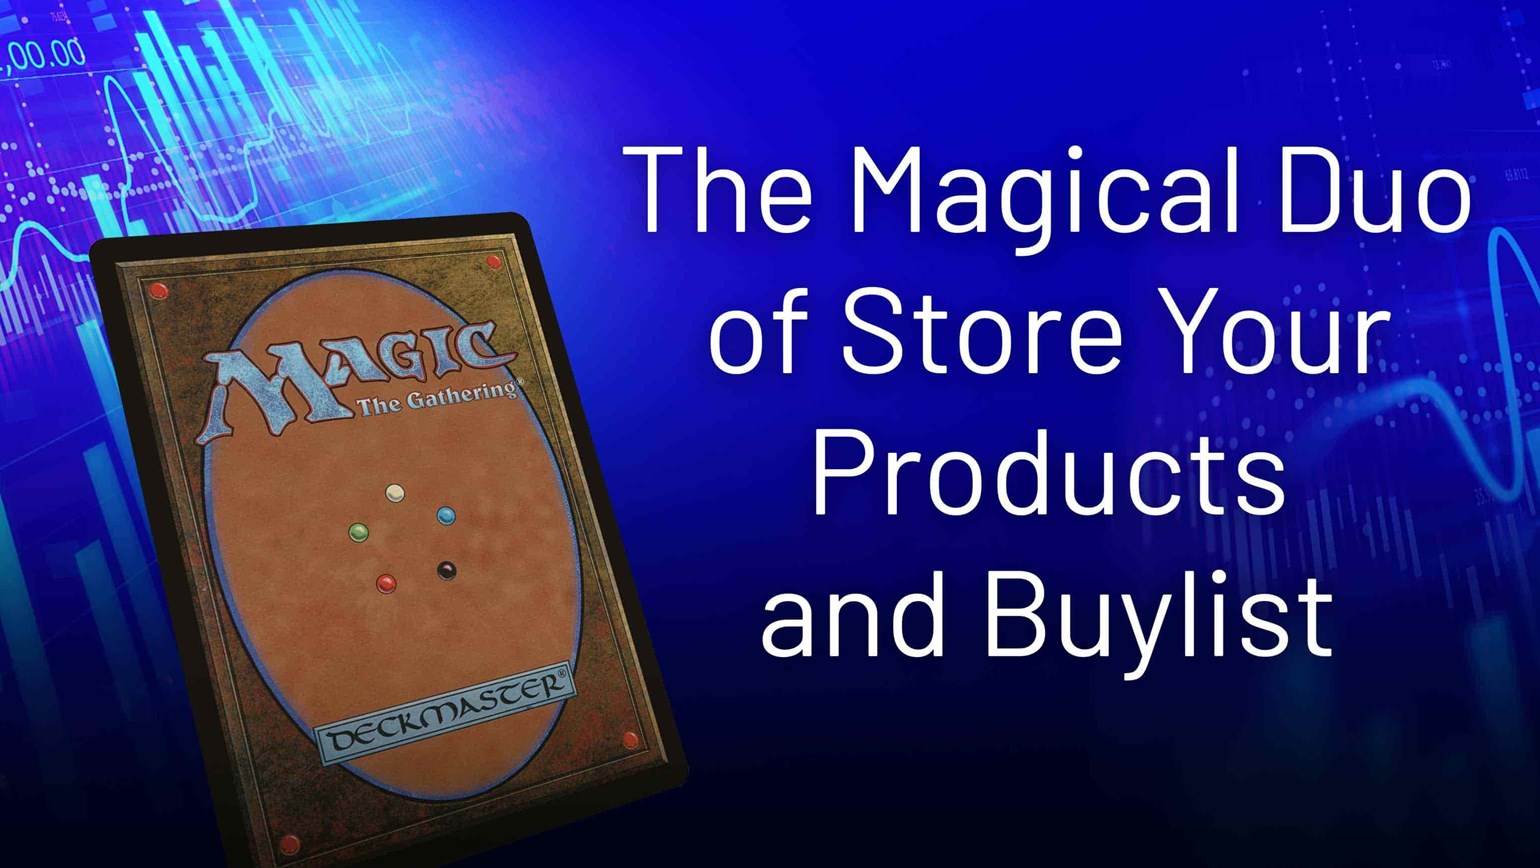 The Magical Duo of Store Your Products and Buylist